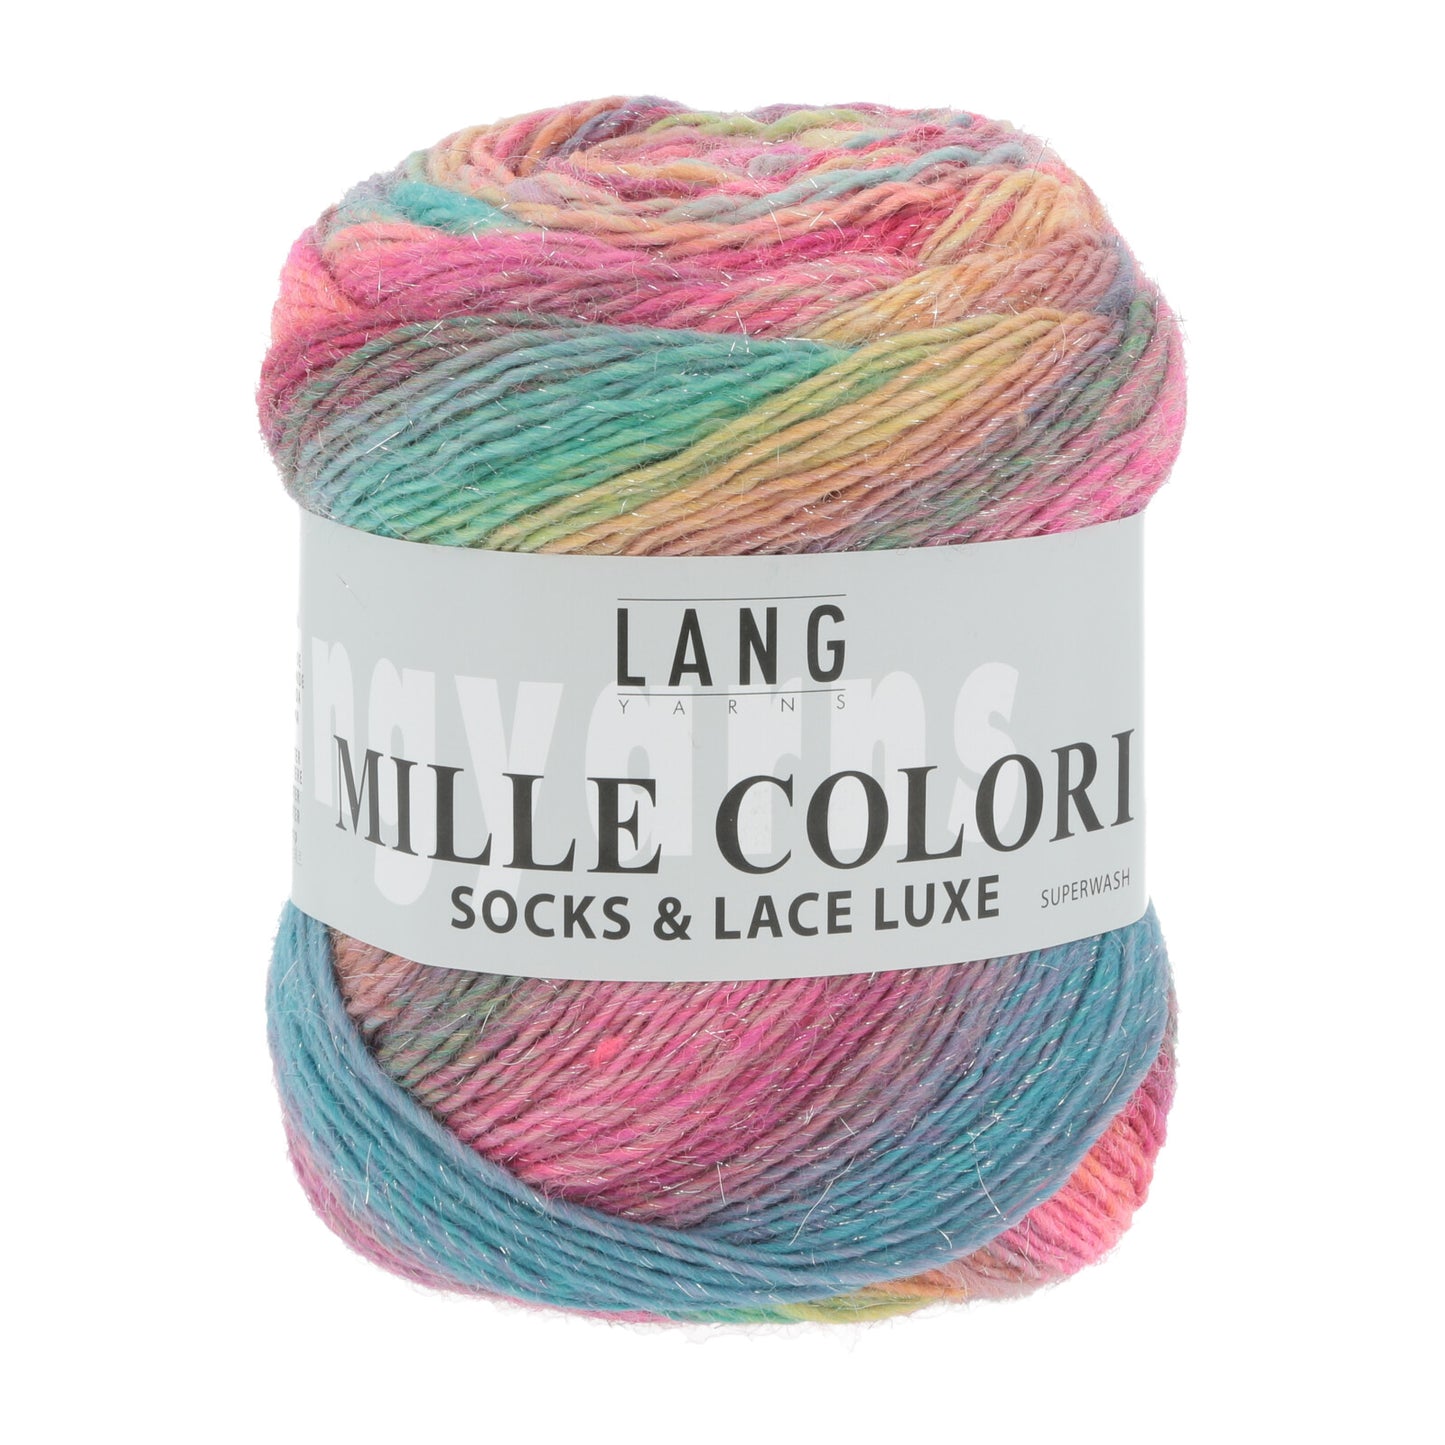 Mille Colori Socks & Lace Luxe | Lang Yarns